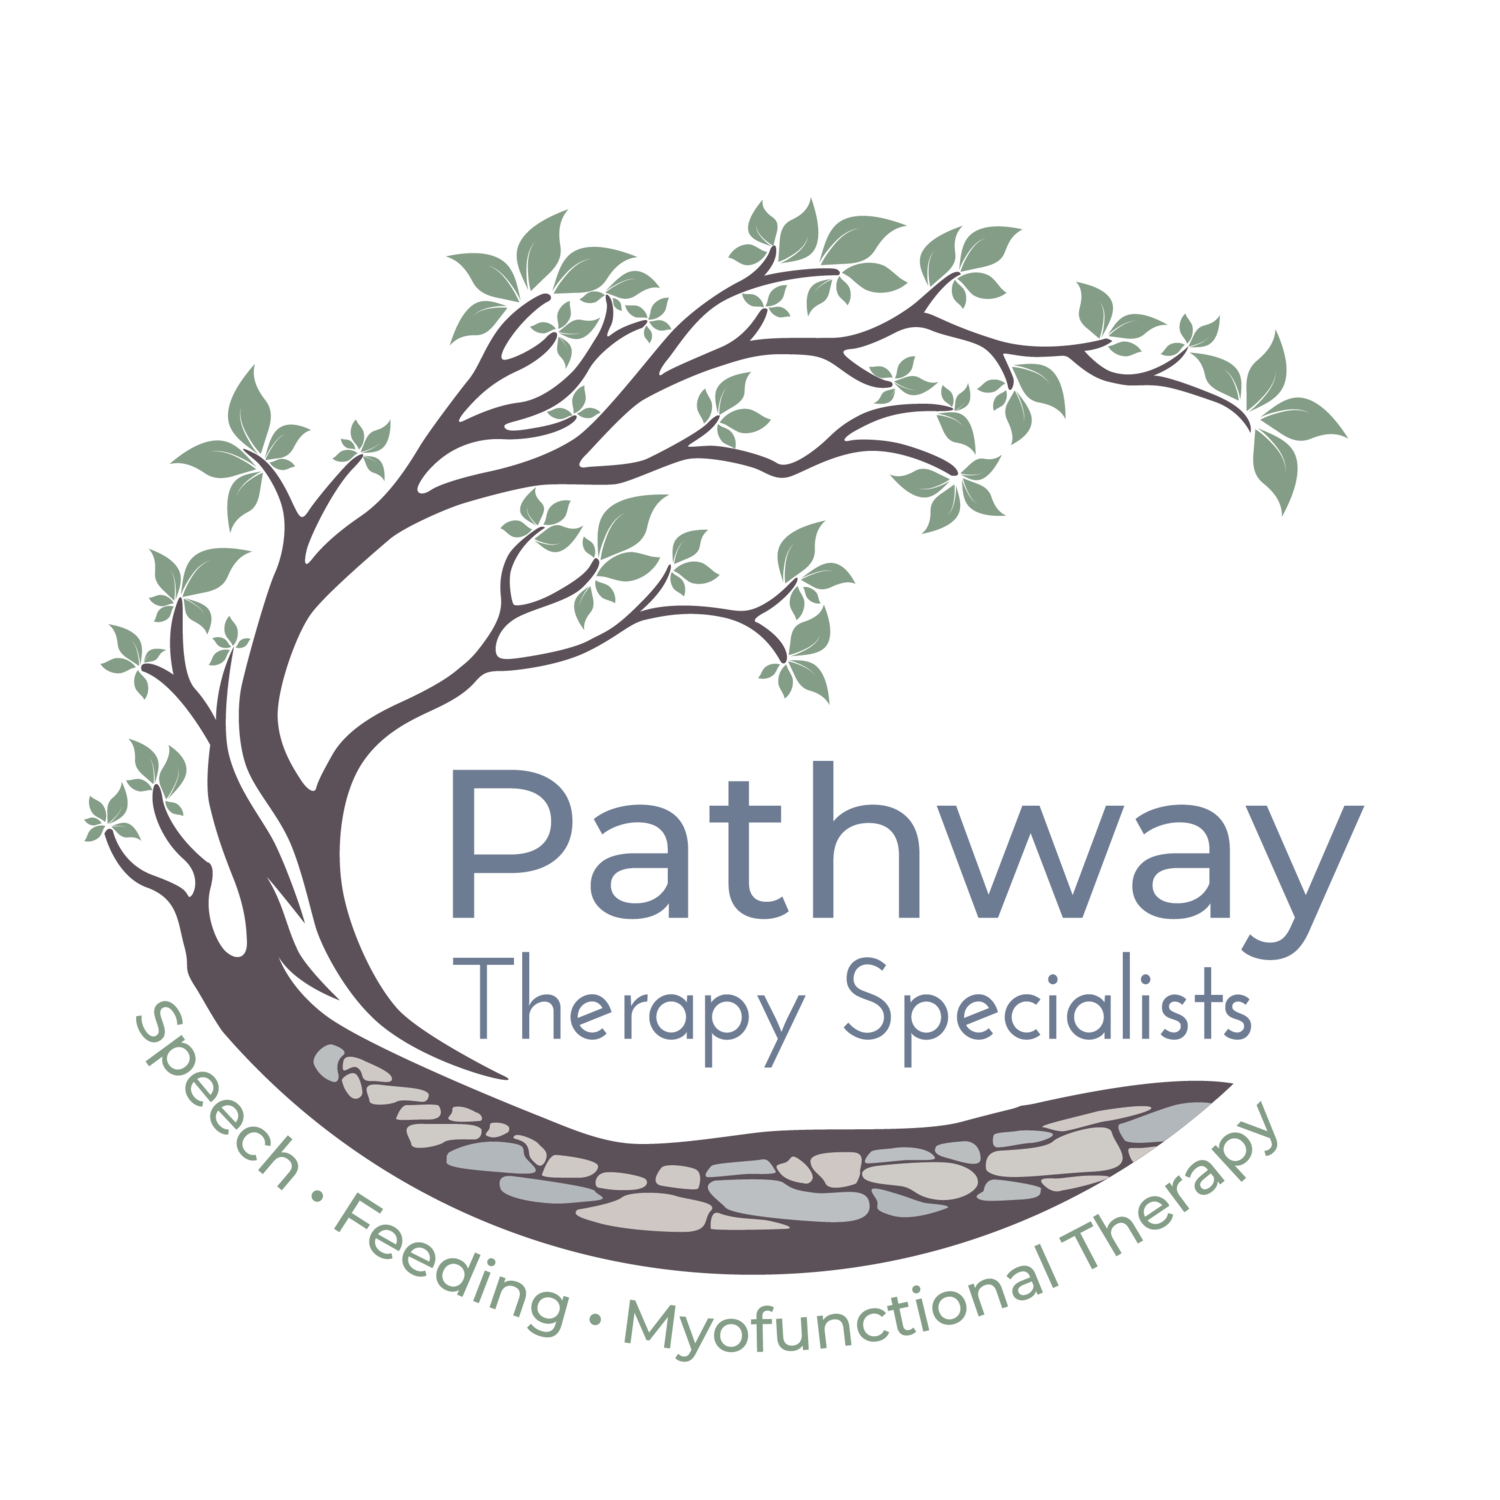 New Kent Speech, Myofunctional, and Feeding Therapy at Pathway Therapy Specialists